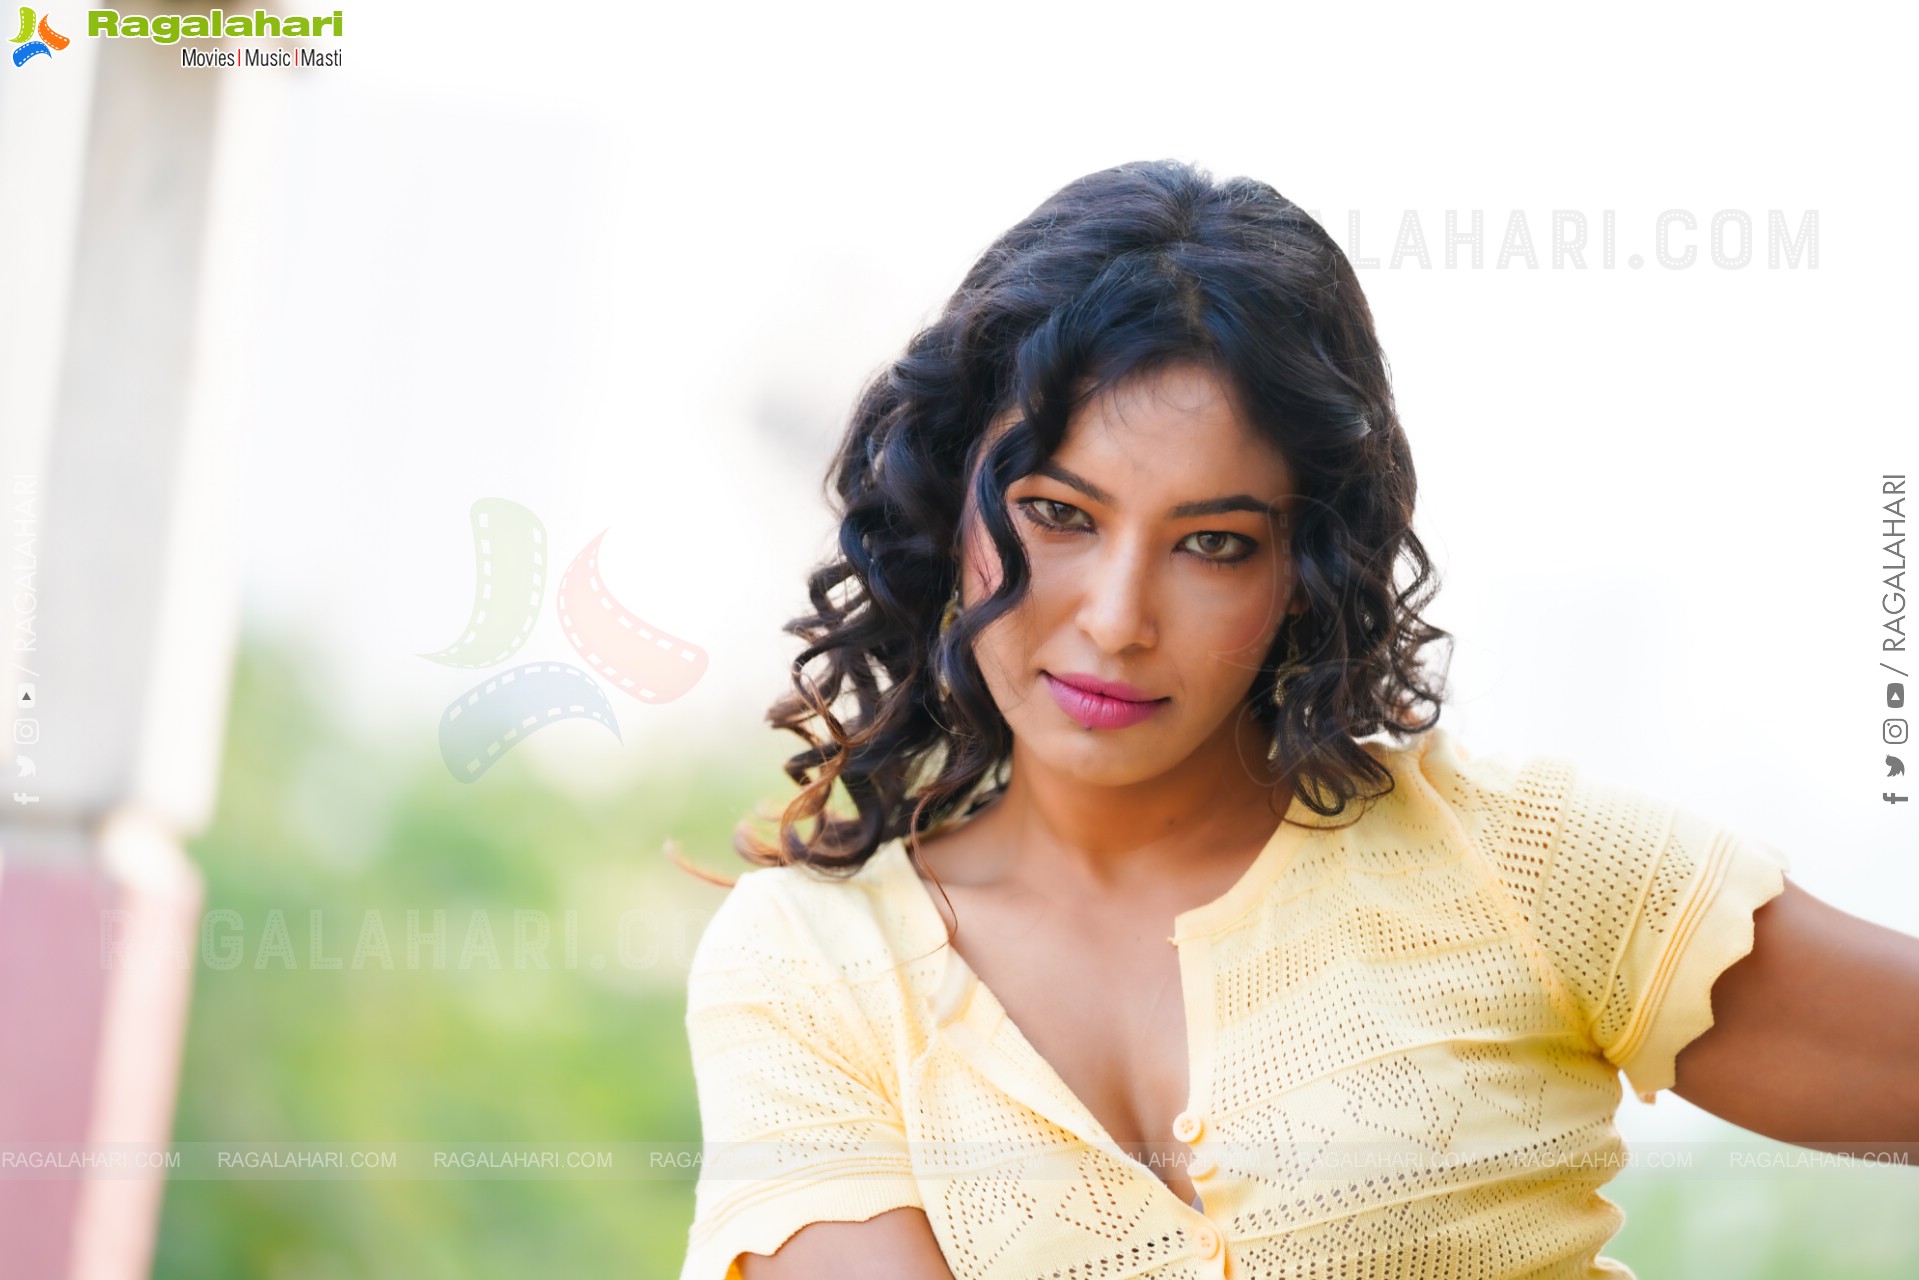 Ankita Bhattacharya in Yellow Crop Top and Jeans Pant, Exclusive Photoshoot